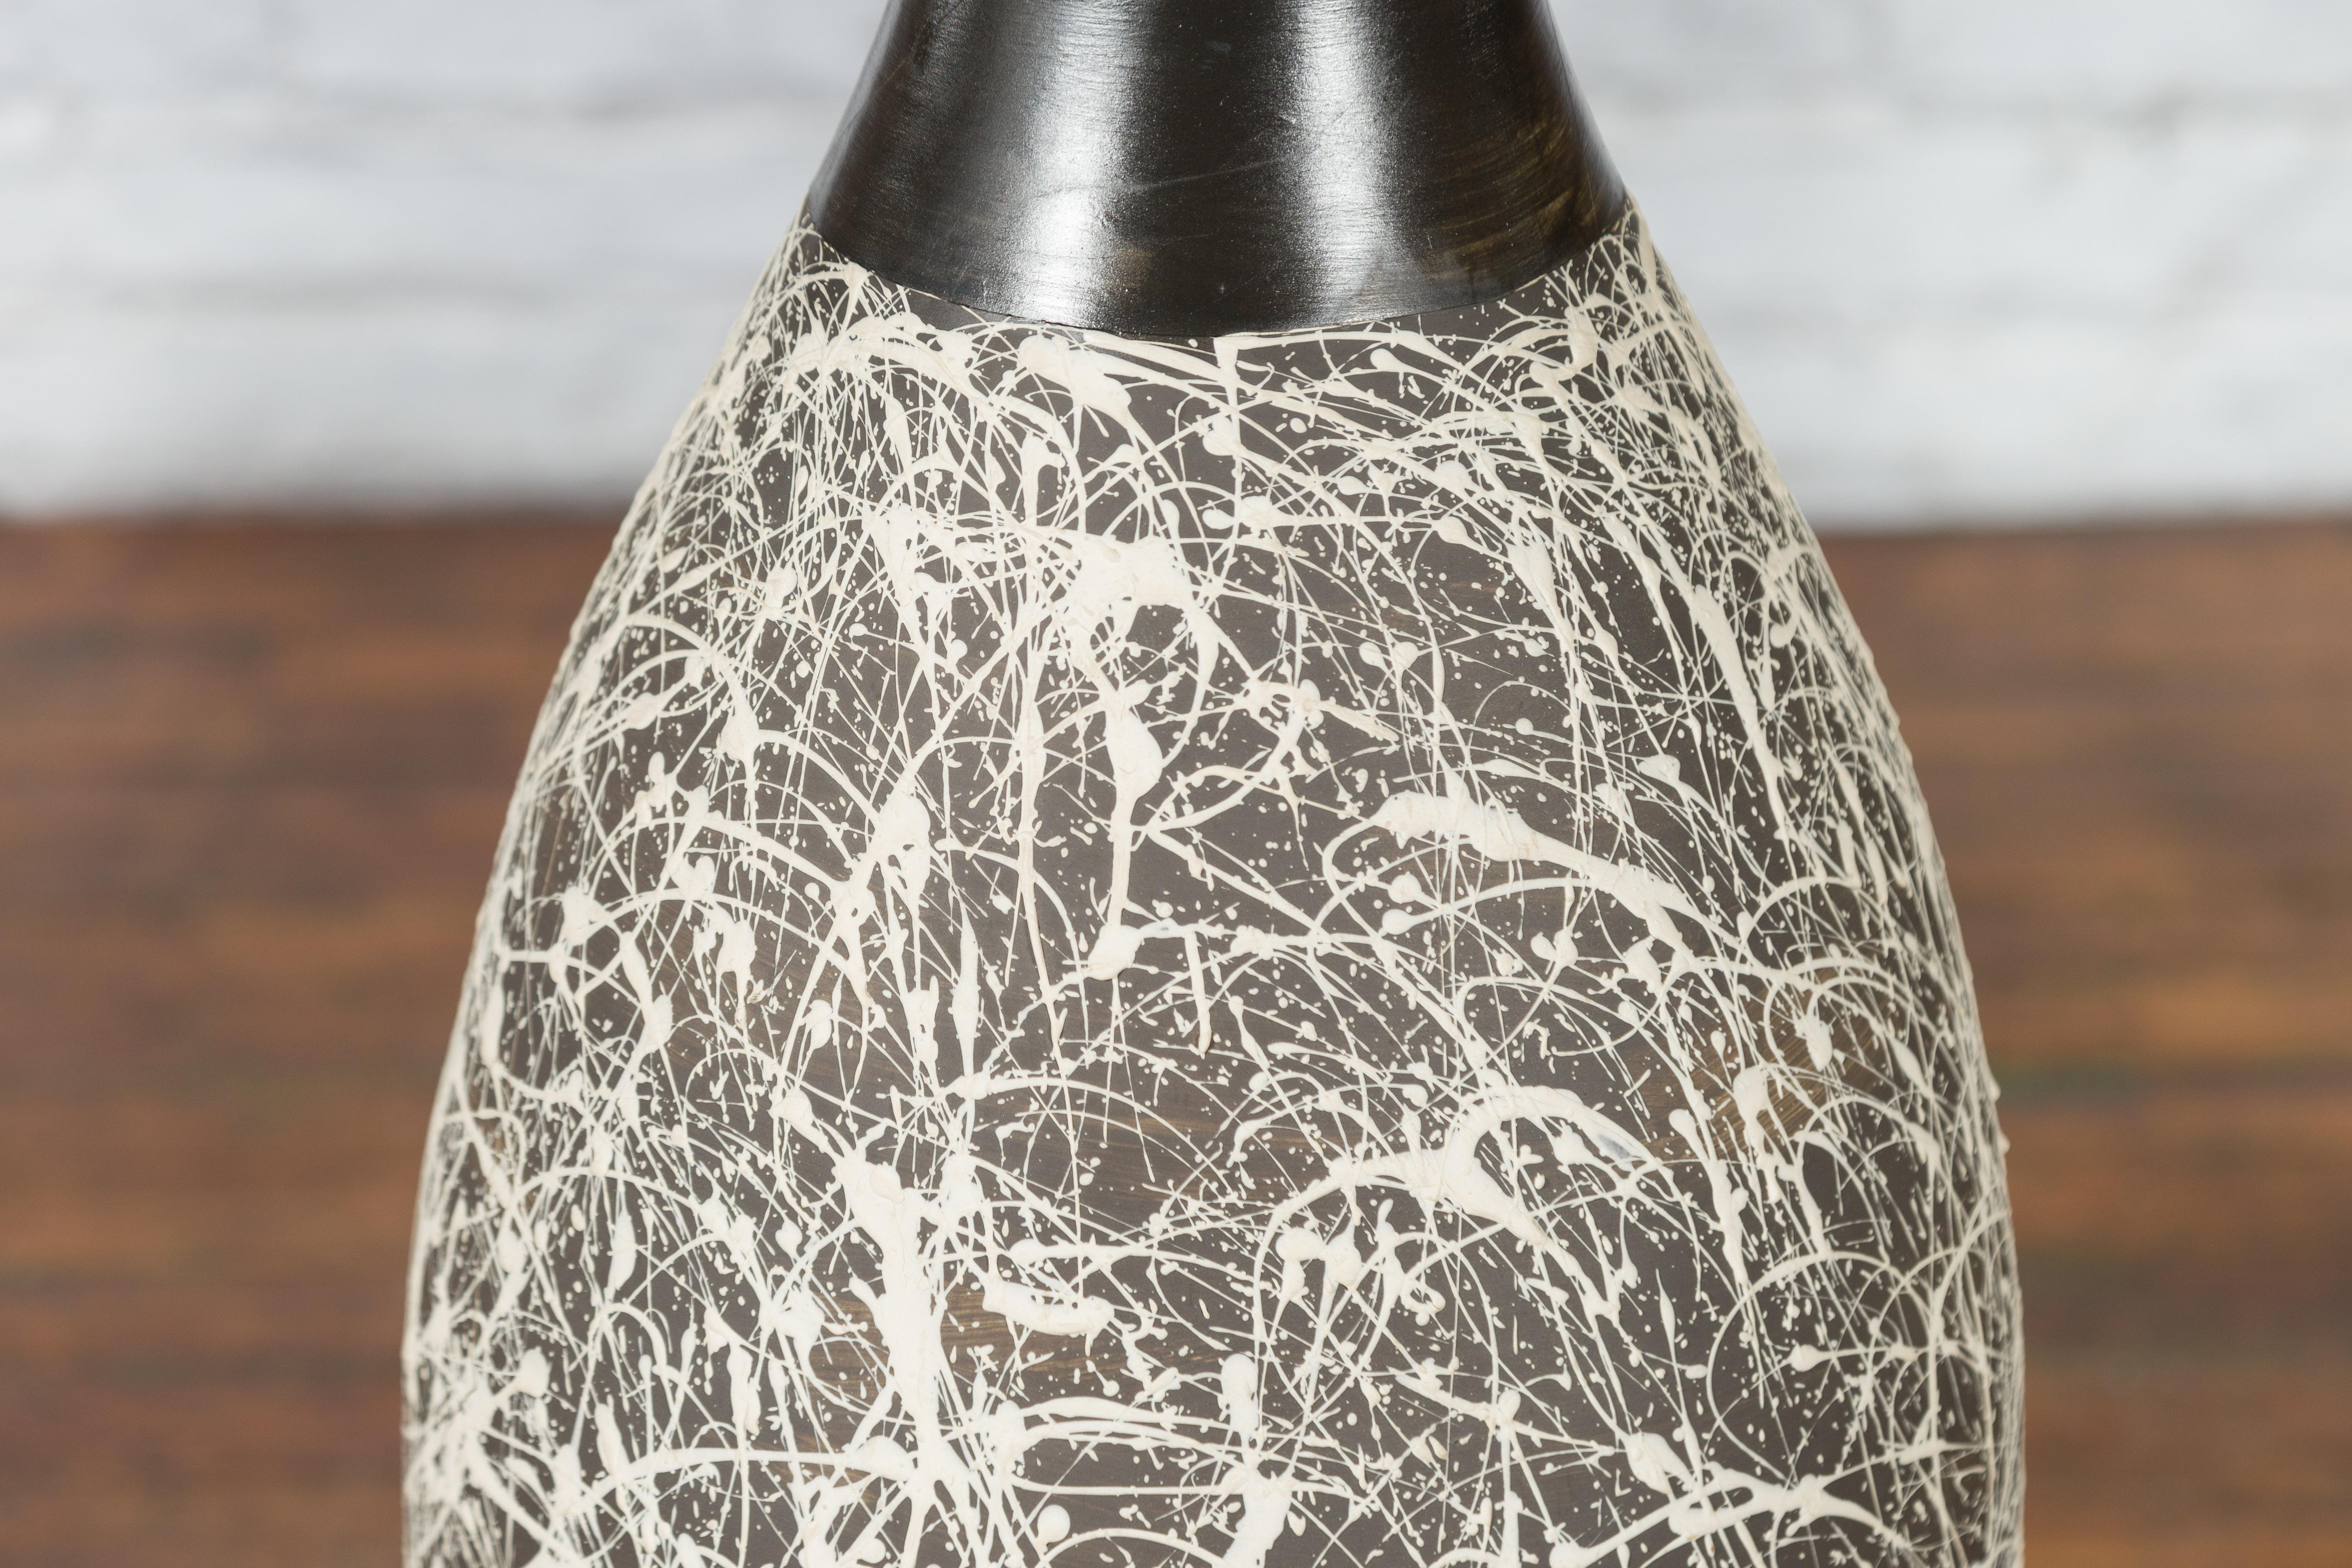 Ceramic Tall Contemporary Artisan Prem Collection Black Neck Vase White Dripping Décor For Sale